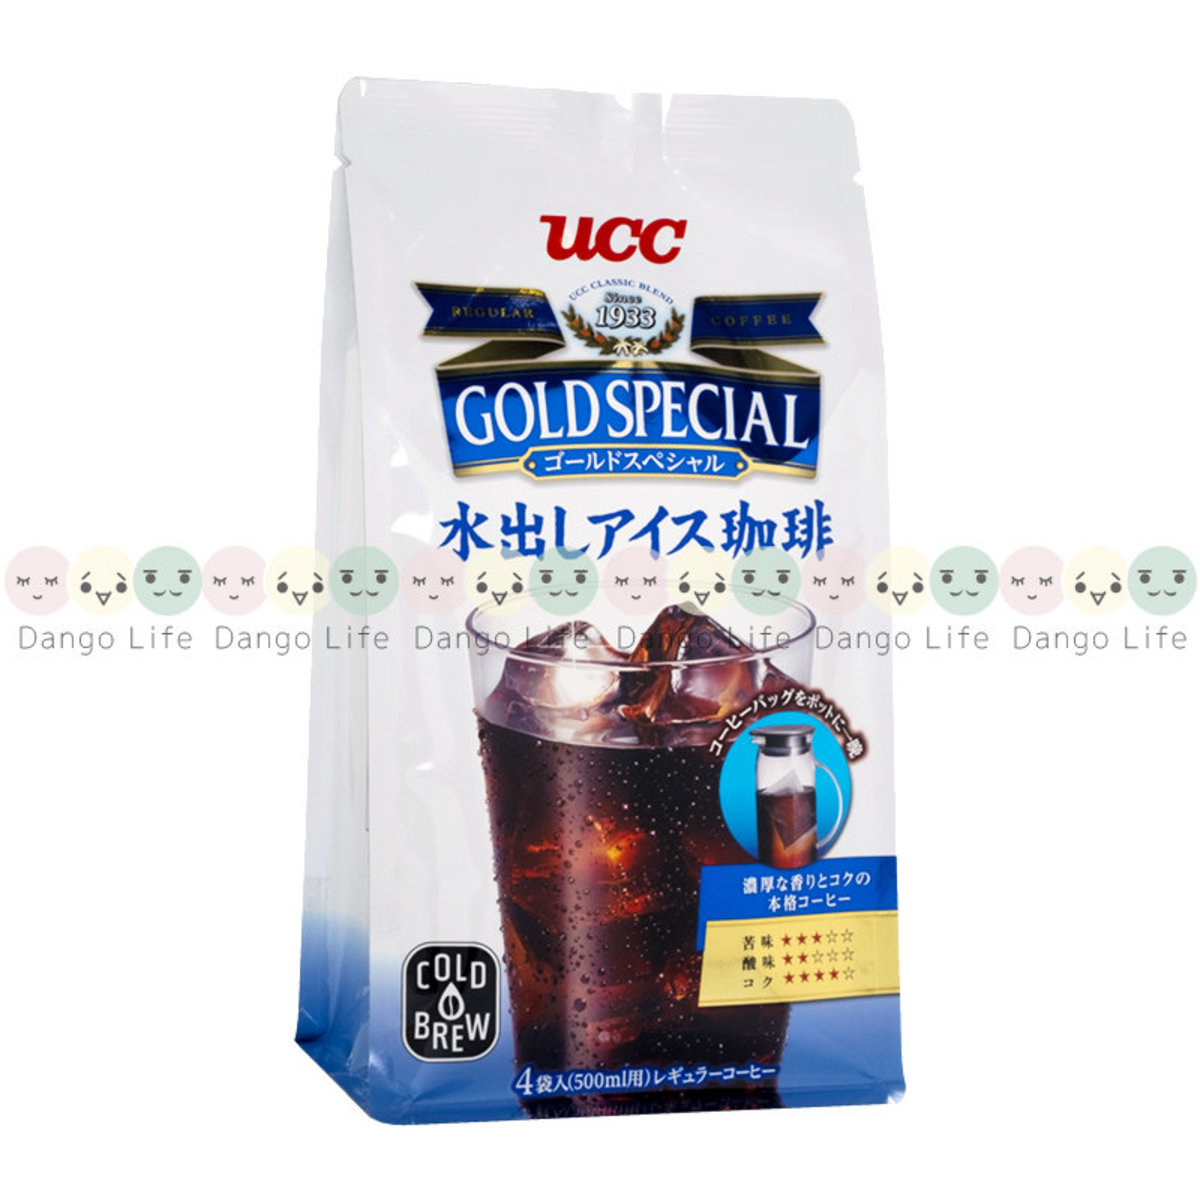 Ucc | Specialty cold brew coffee 4pcs/Pack (Parallel Import) | HKTVmall